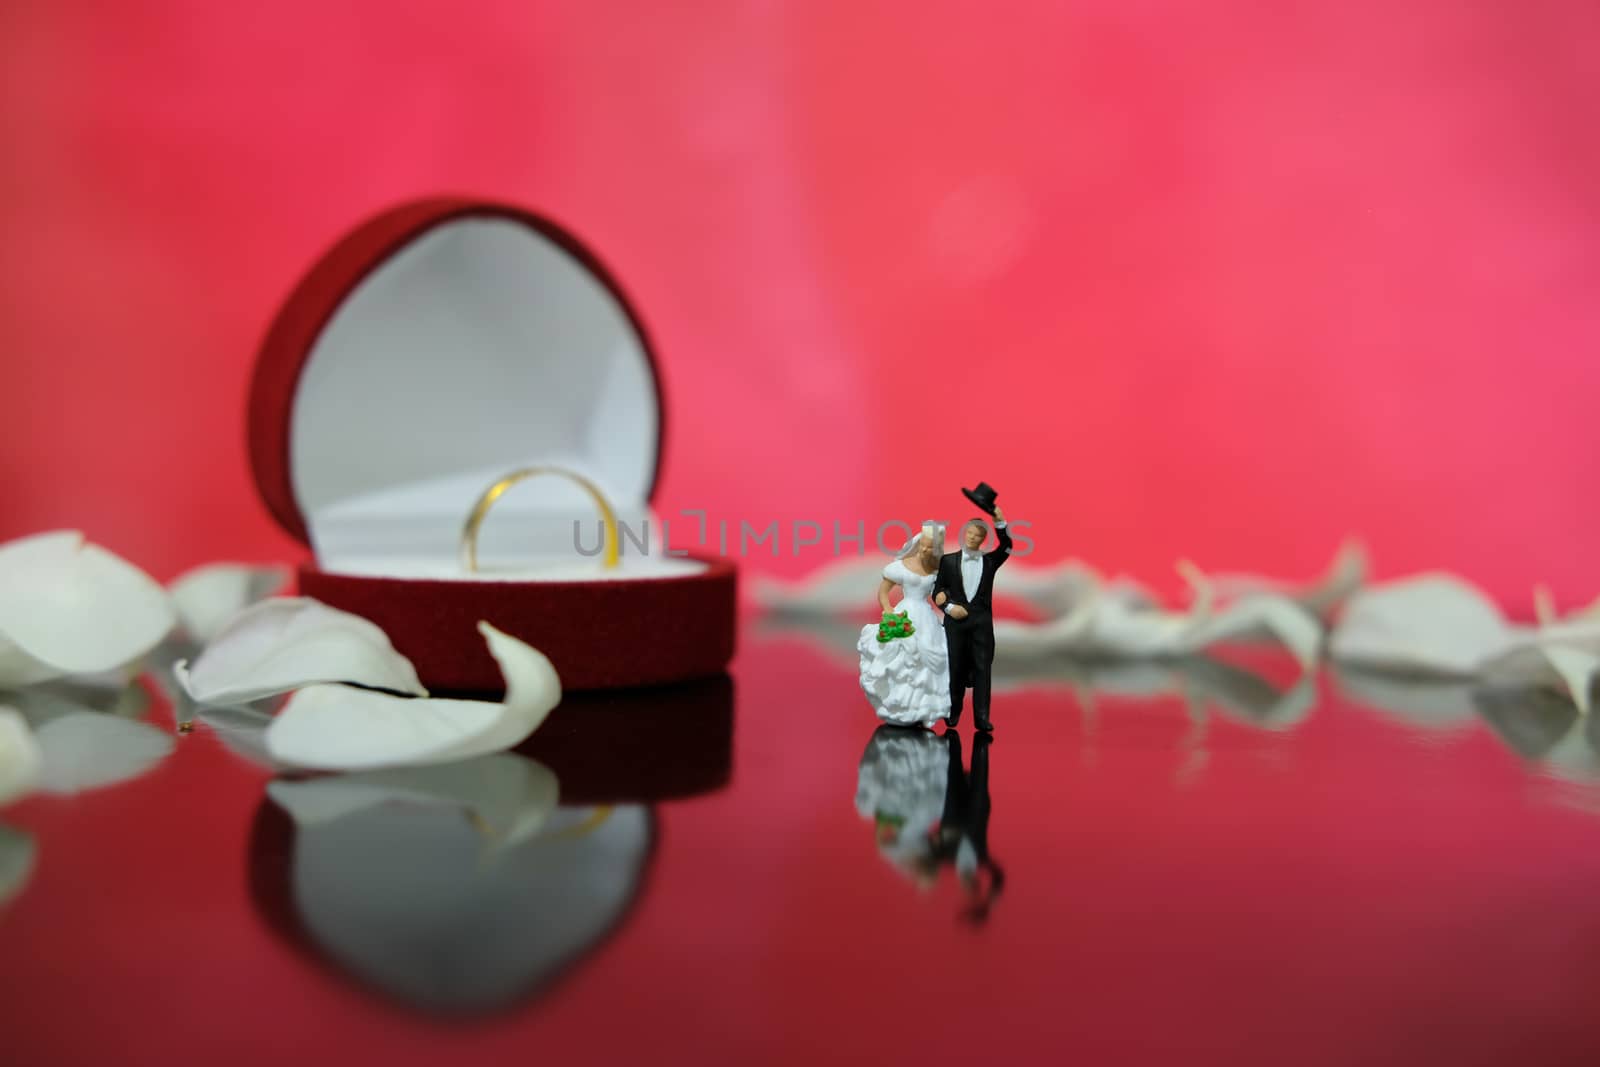 Miniature photography - garden flower outdoor wedding concept, bride and groom walking on shiny floor with white rose petal, including red heart shape ring box